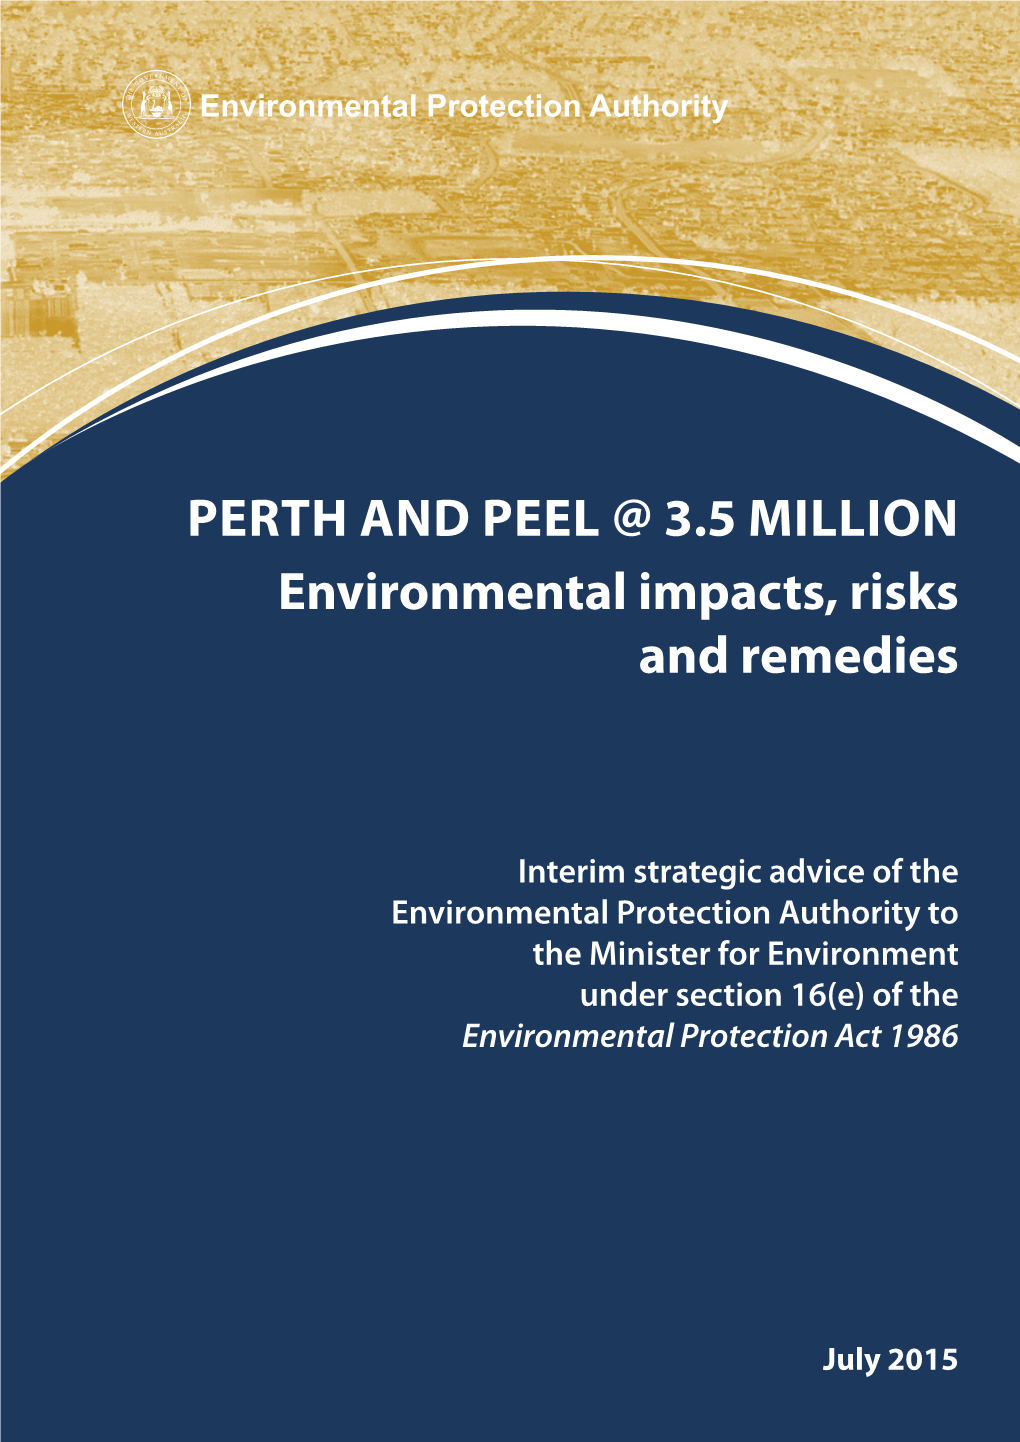 Perth and Peel @ 3.5 Million Environmental Impacts, Risks and Remedies